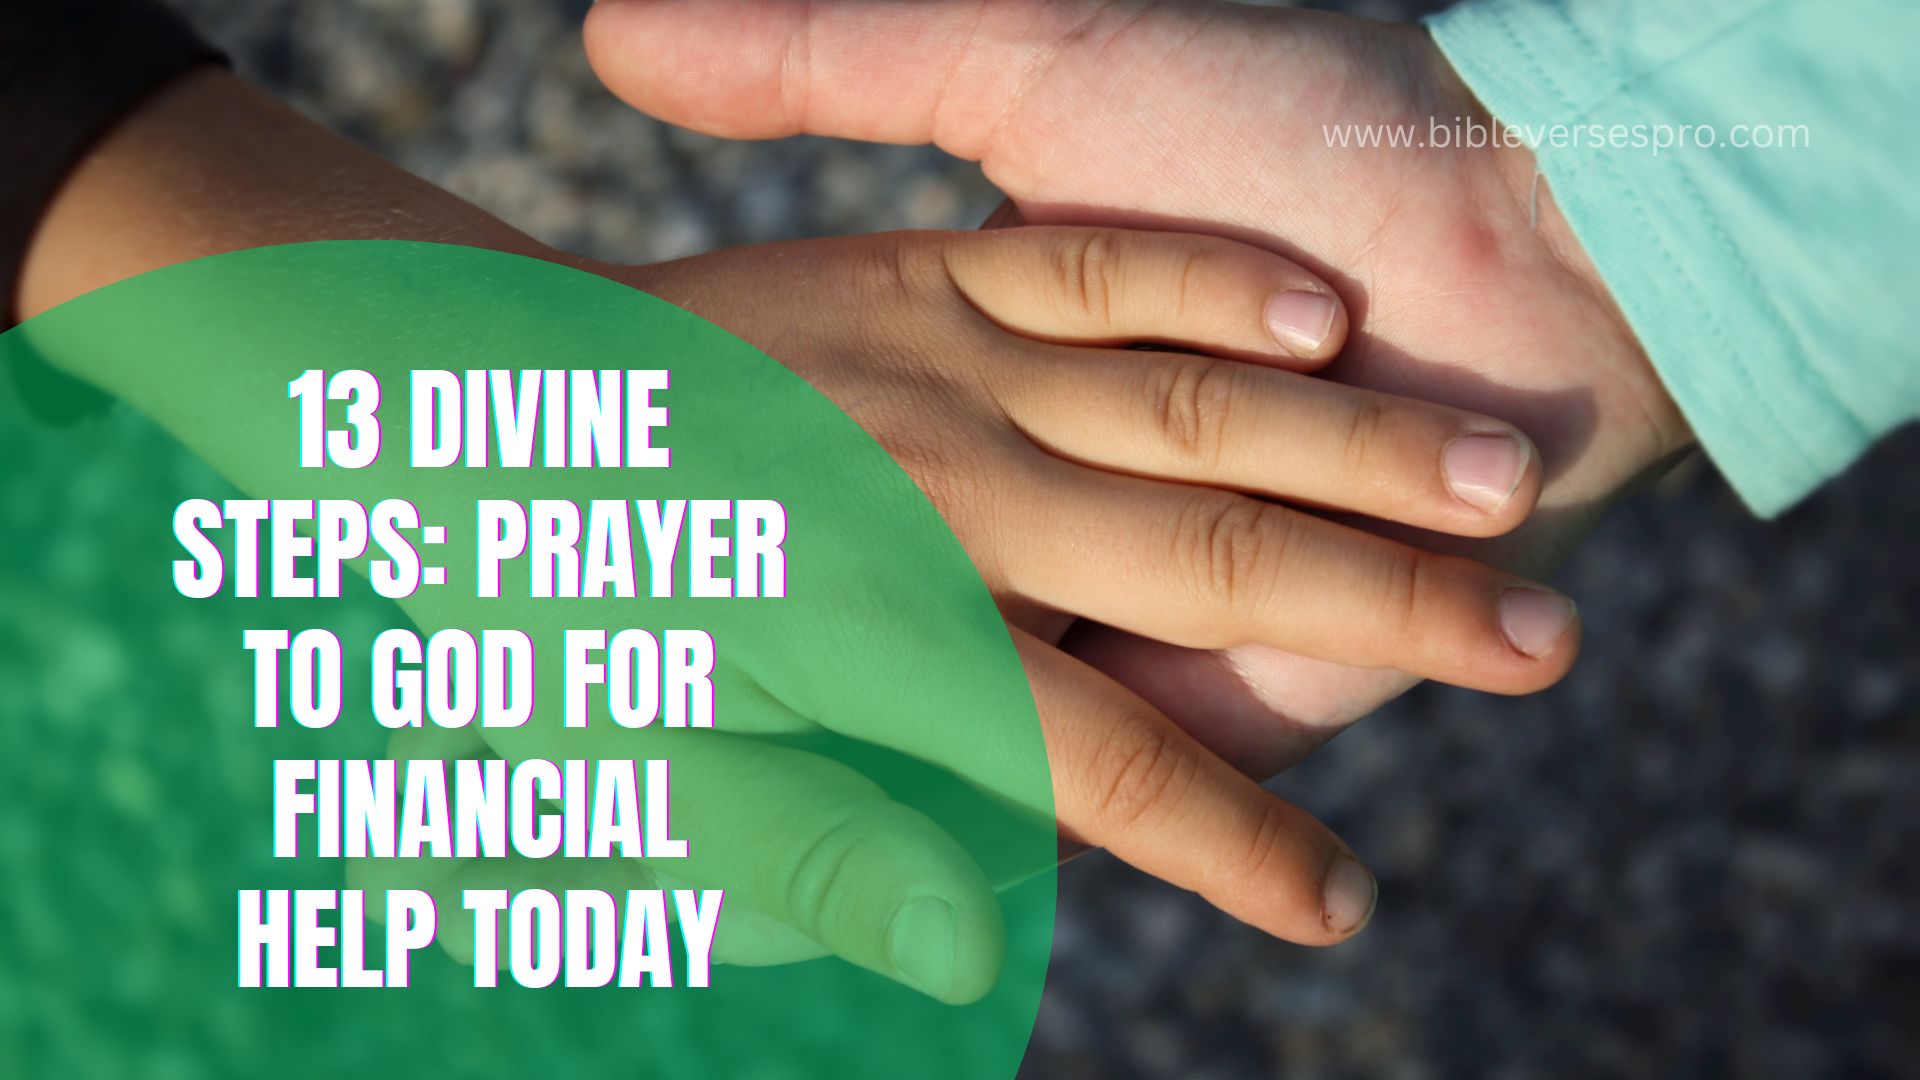 13 Divine Steps Prayer to God for Financial Help Today